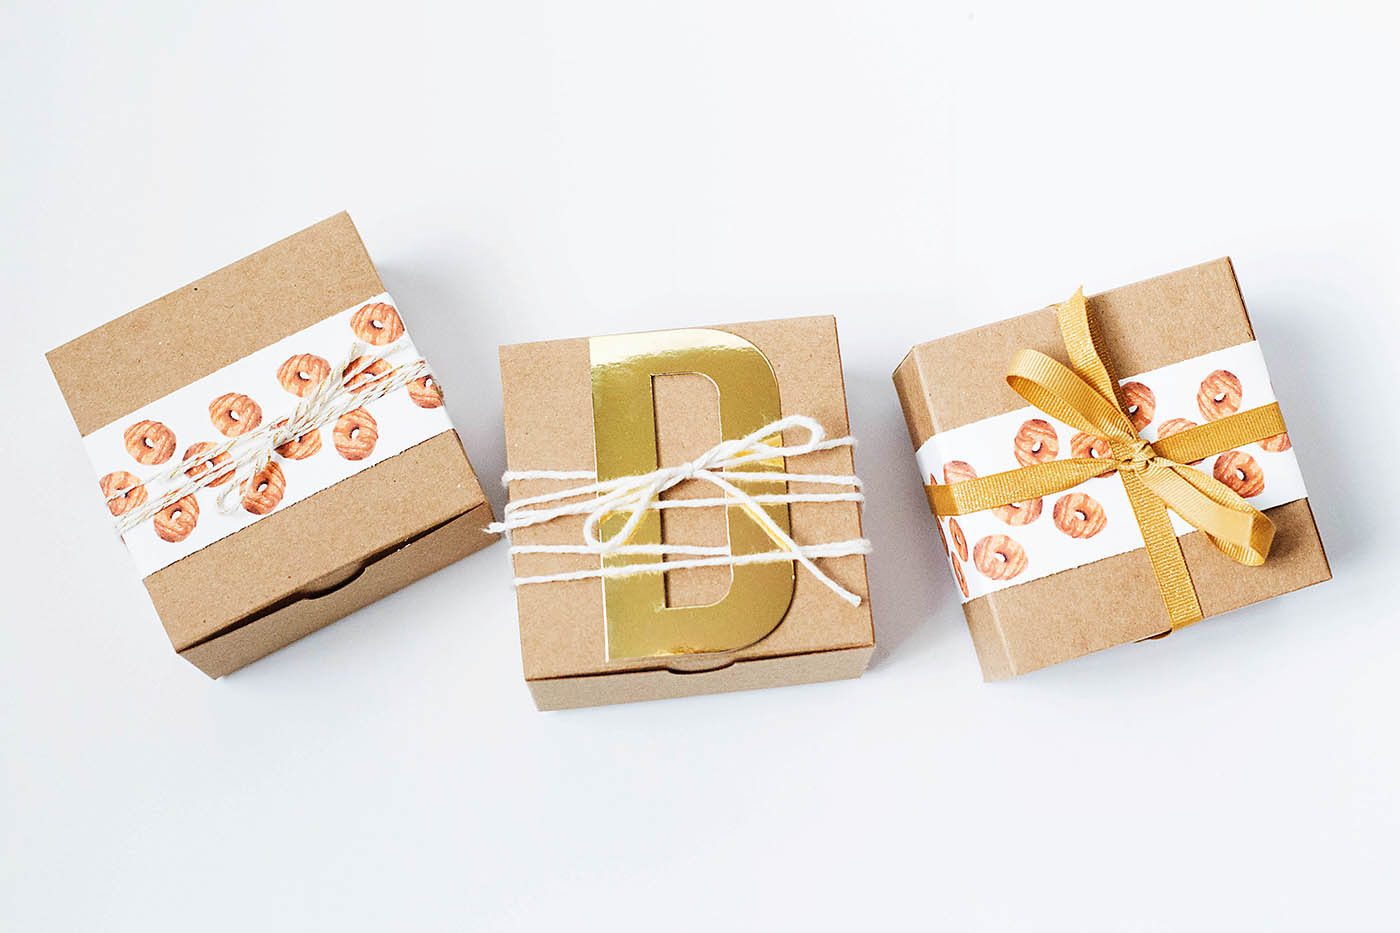 Free printable donut wrapping - perfect for a fun teacher or friend gift!